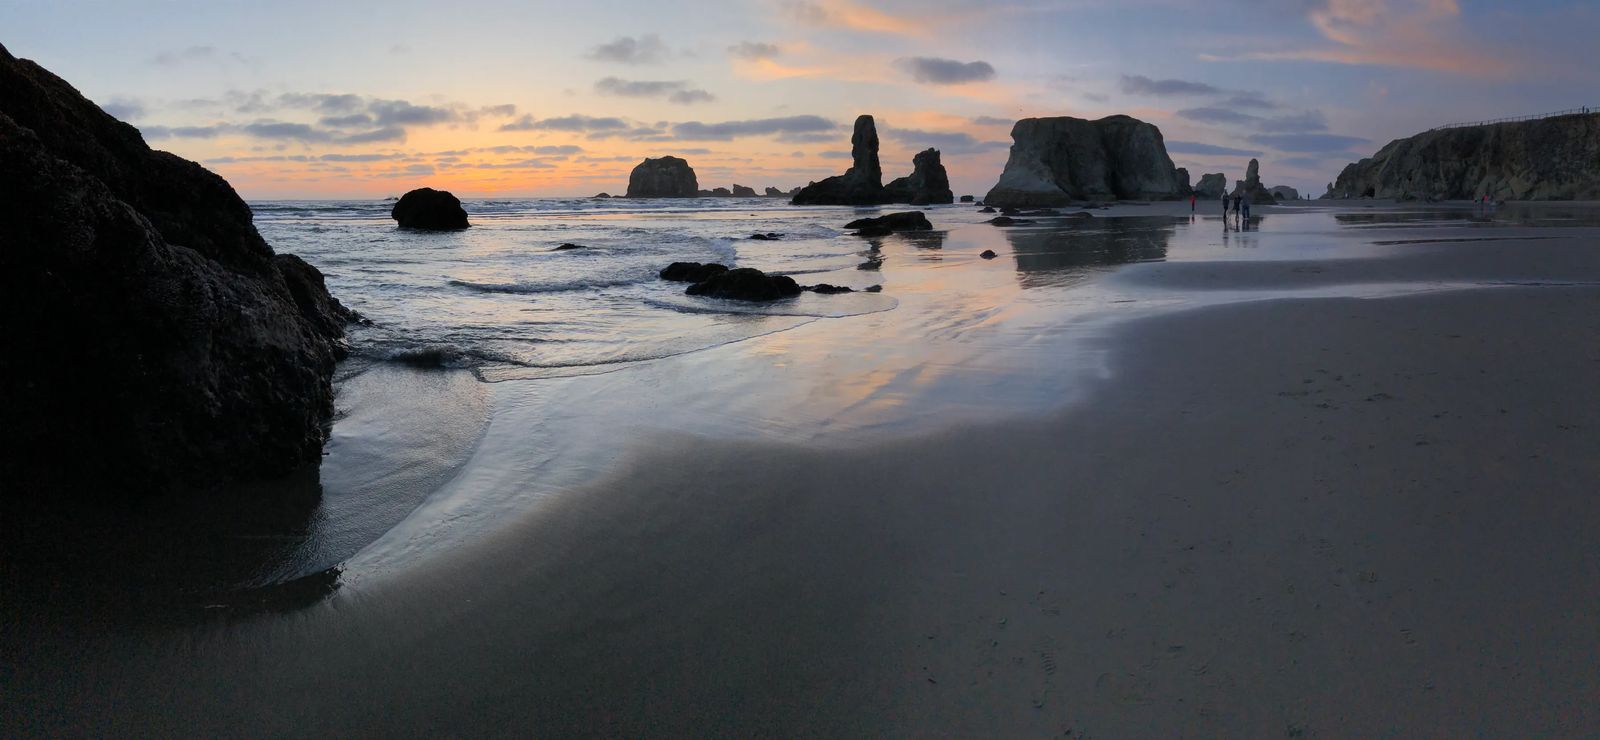 What to do in Bandon Oregon